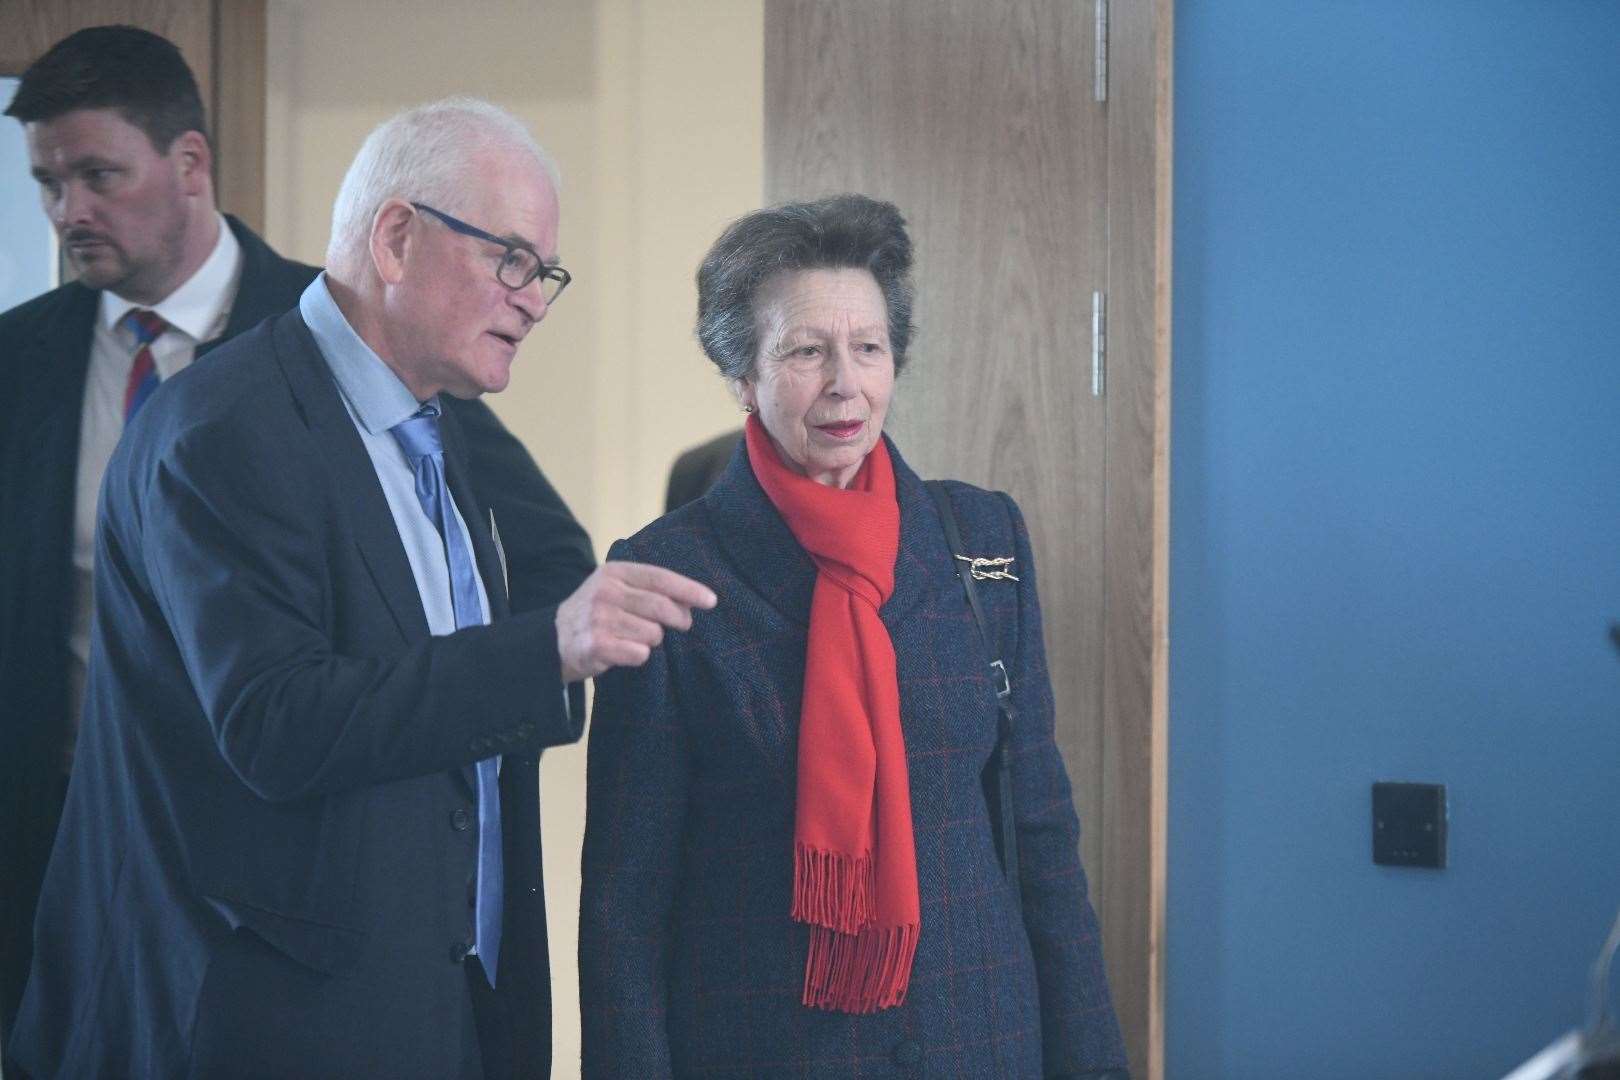 Princess Anne entering the new Rural and Veterinary Innovation Centre in Inverness.